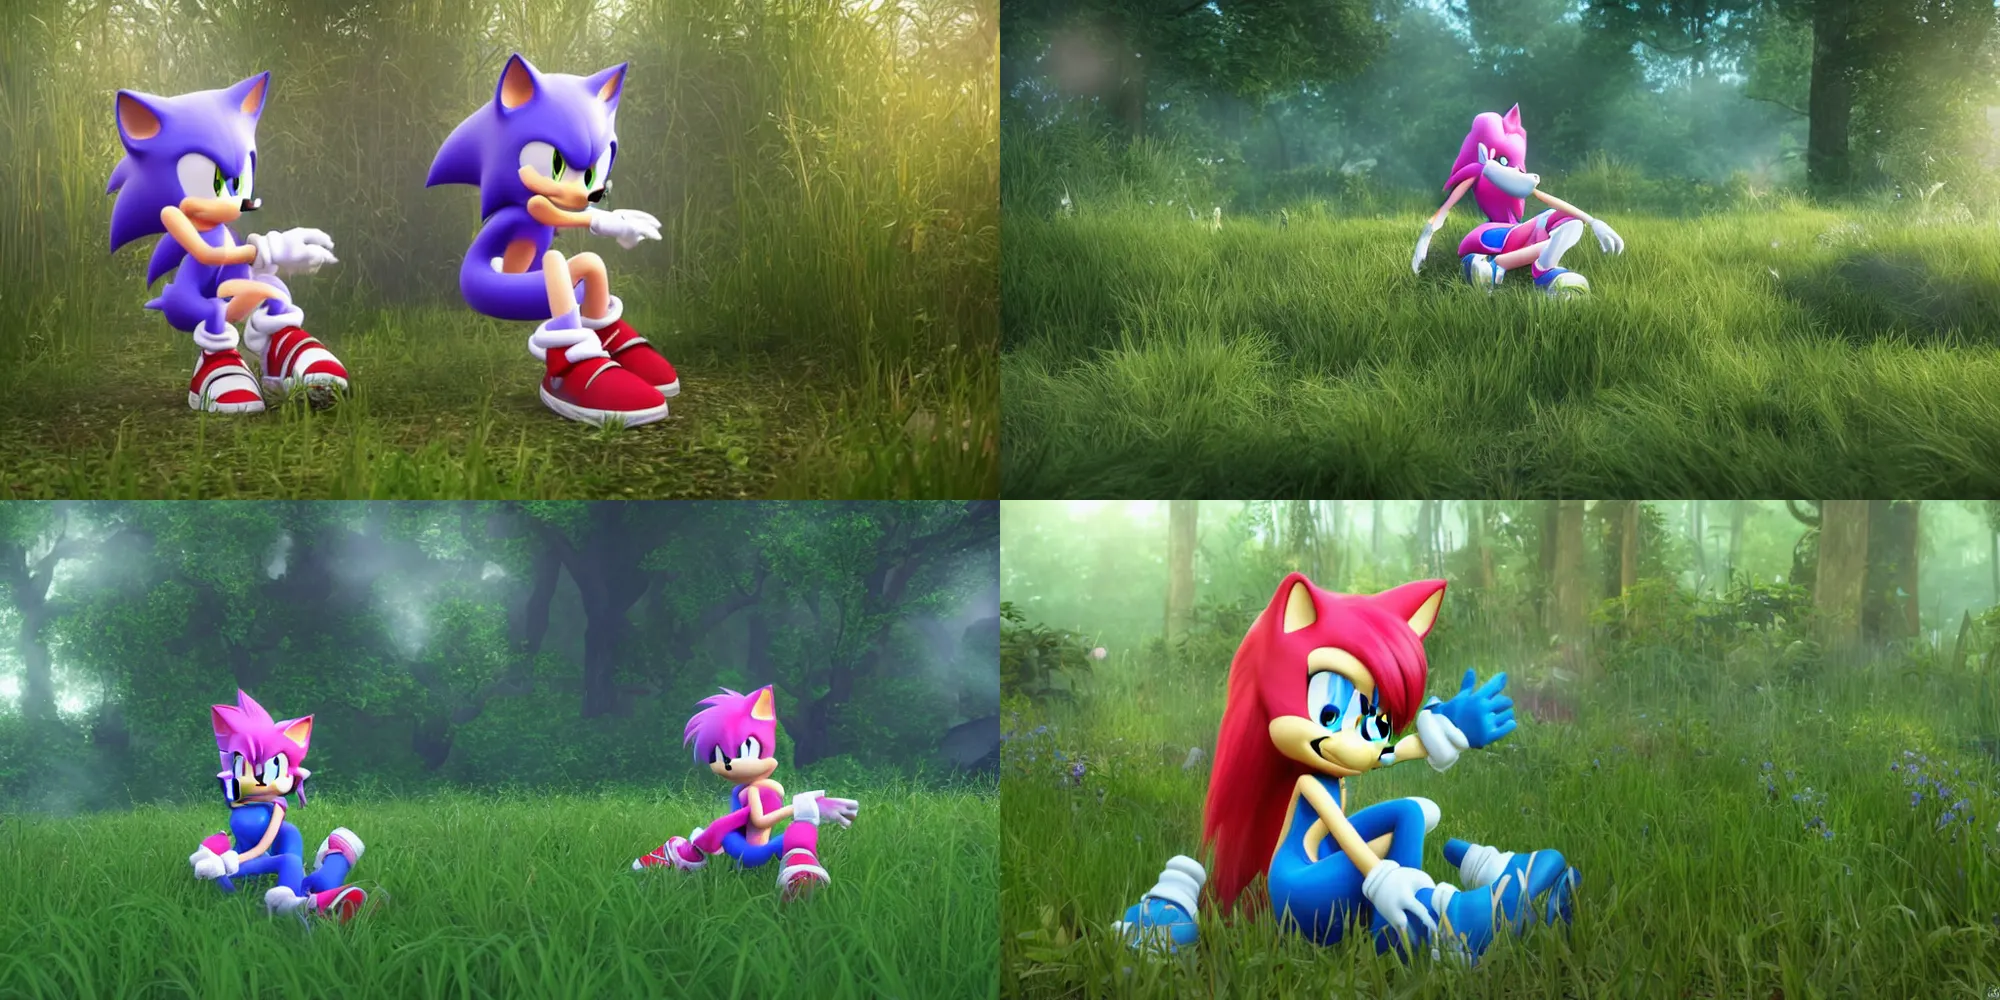 American Sonic 3 & Amy Rose - Legacy Edition Remake